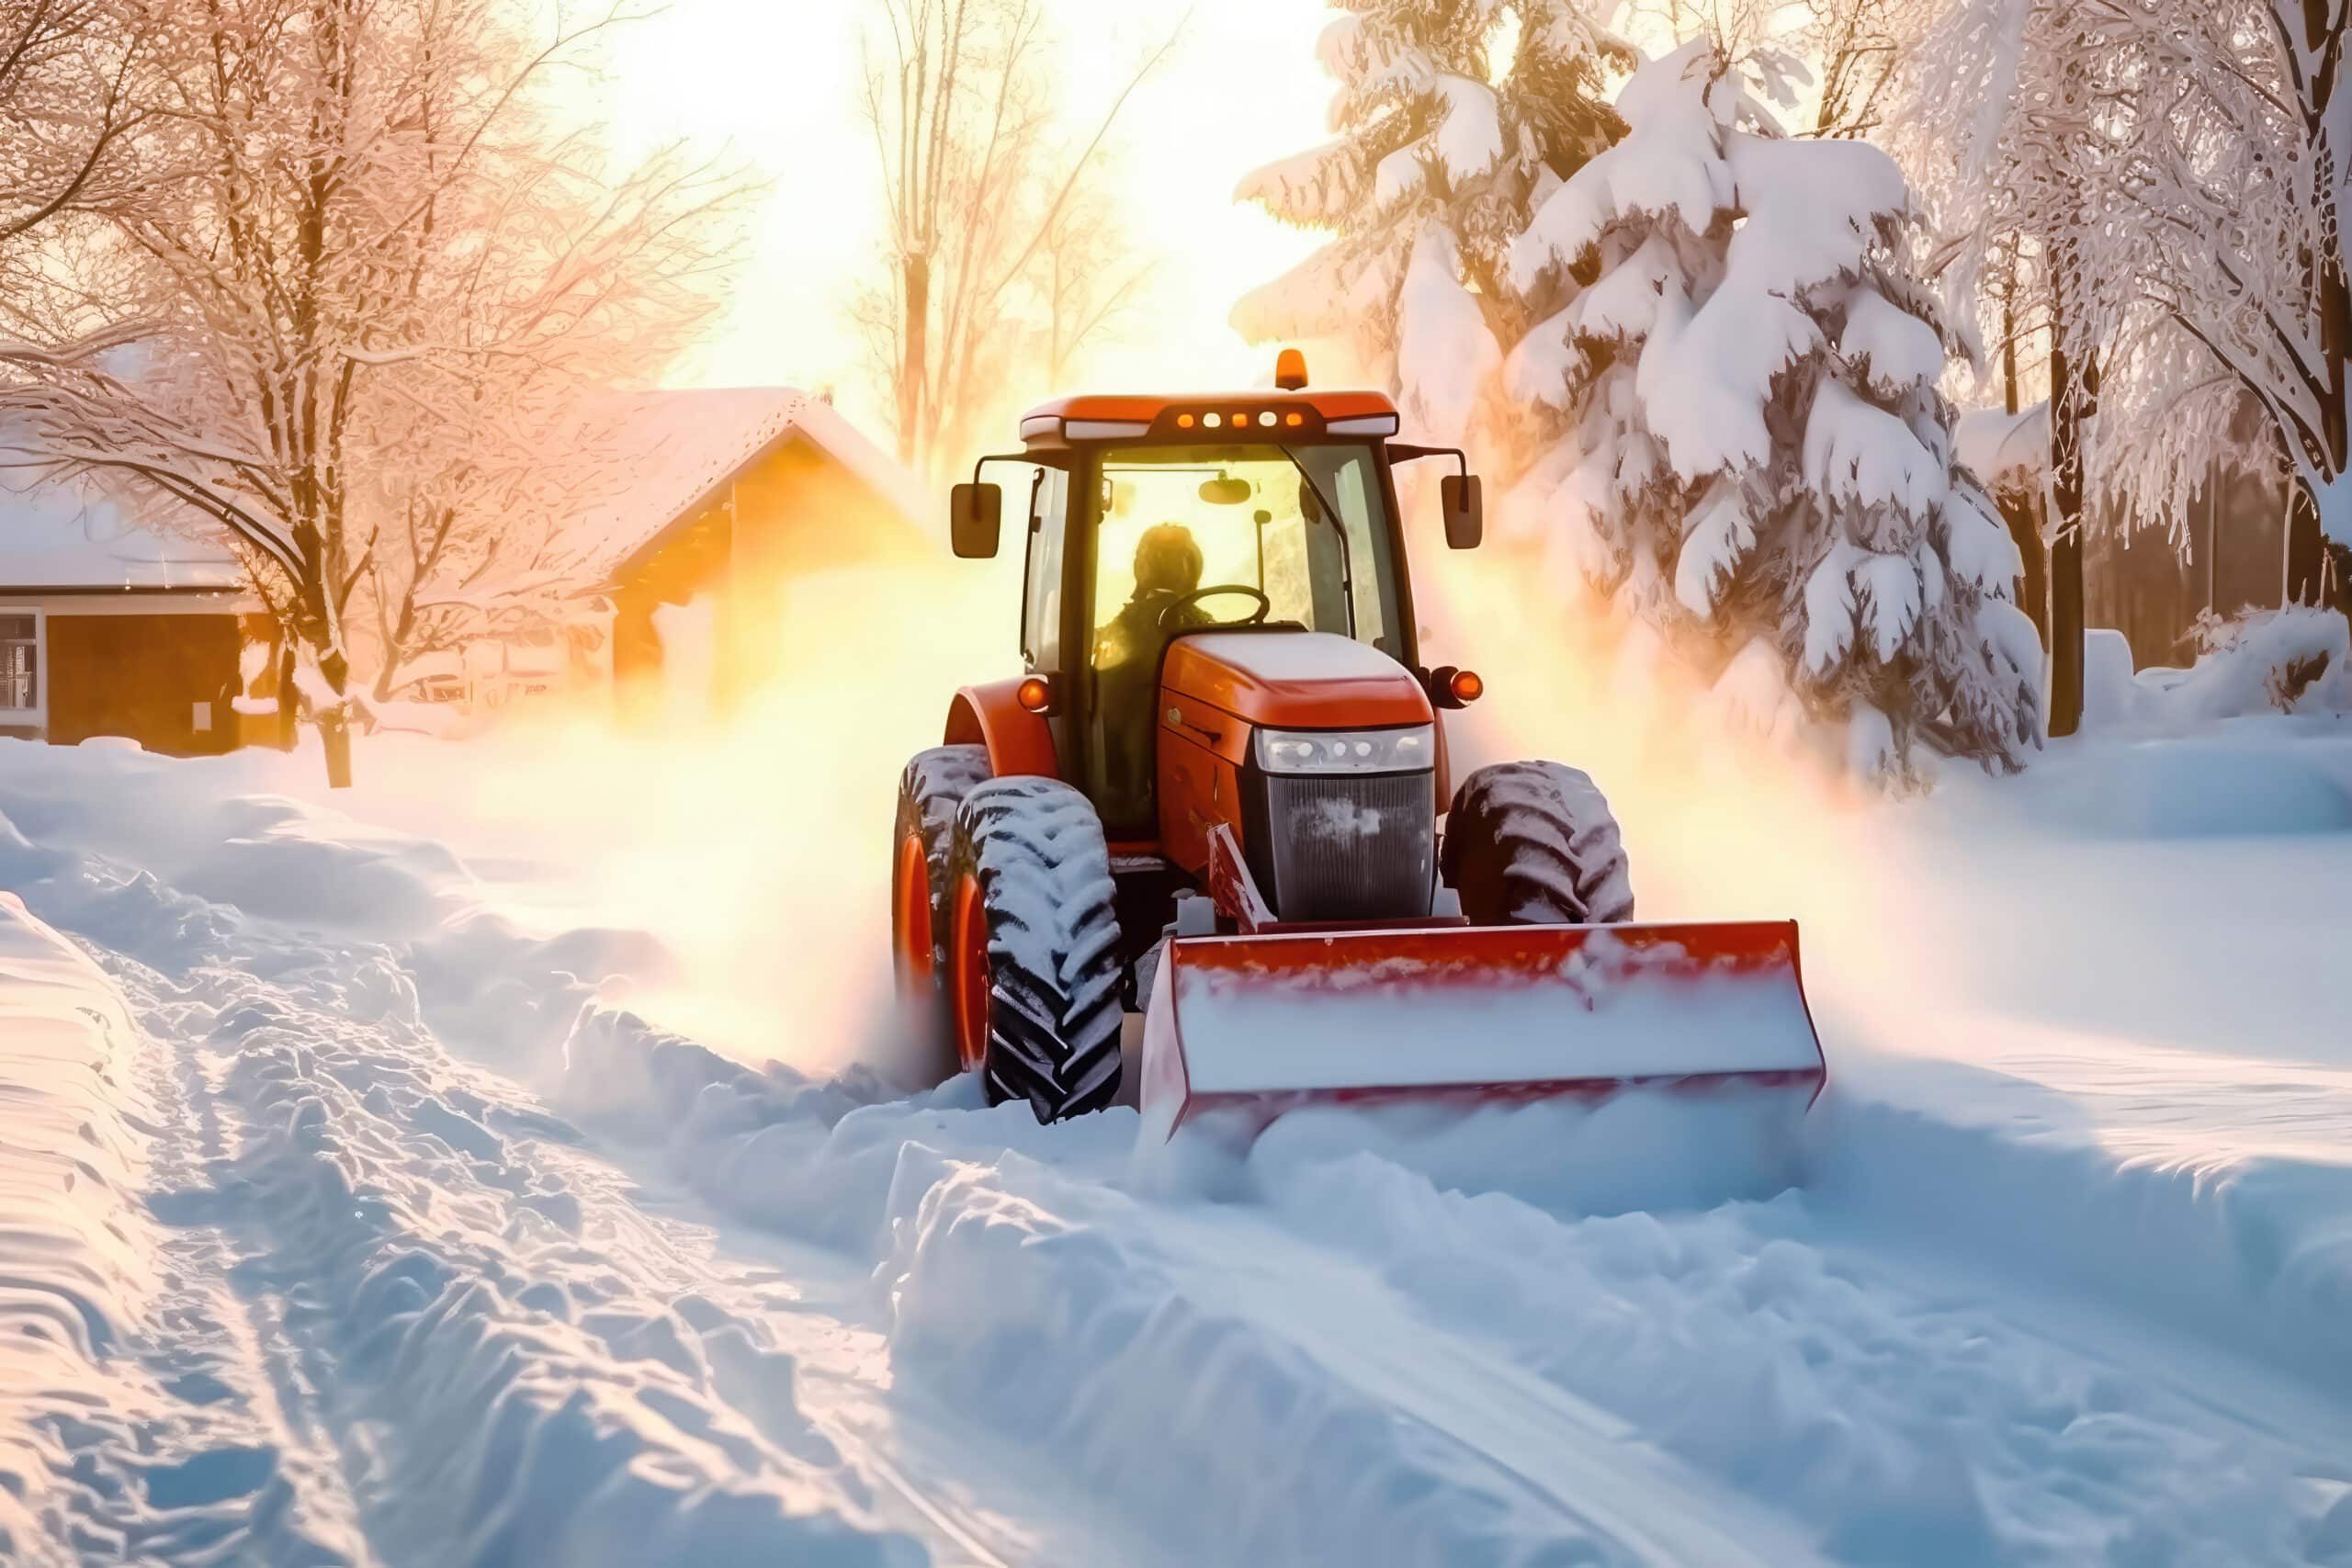 www.appr.com : Who manufactures Ariens snow blowers?